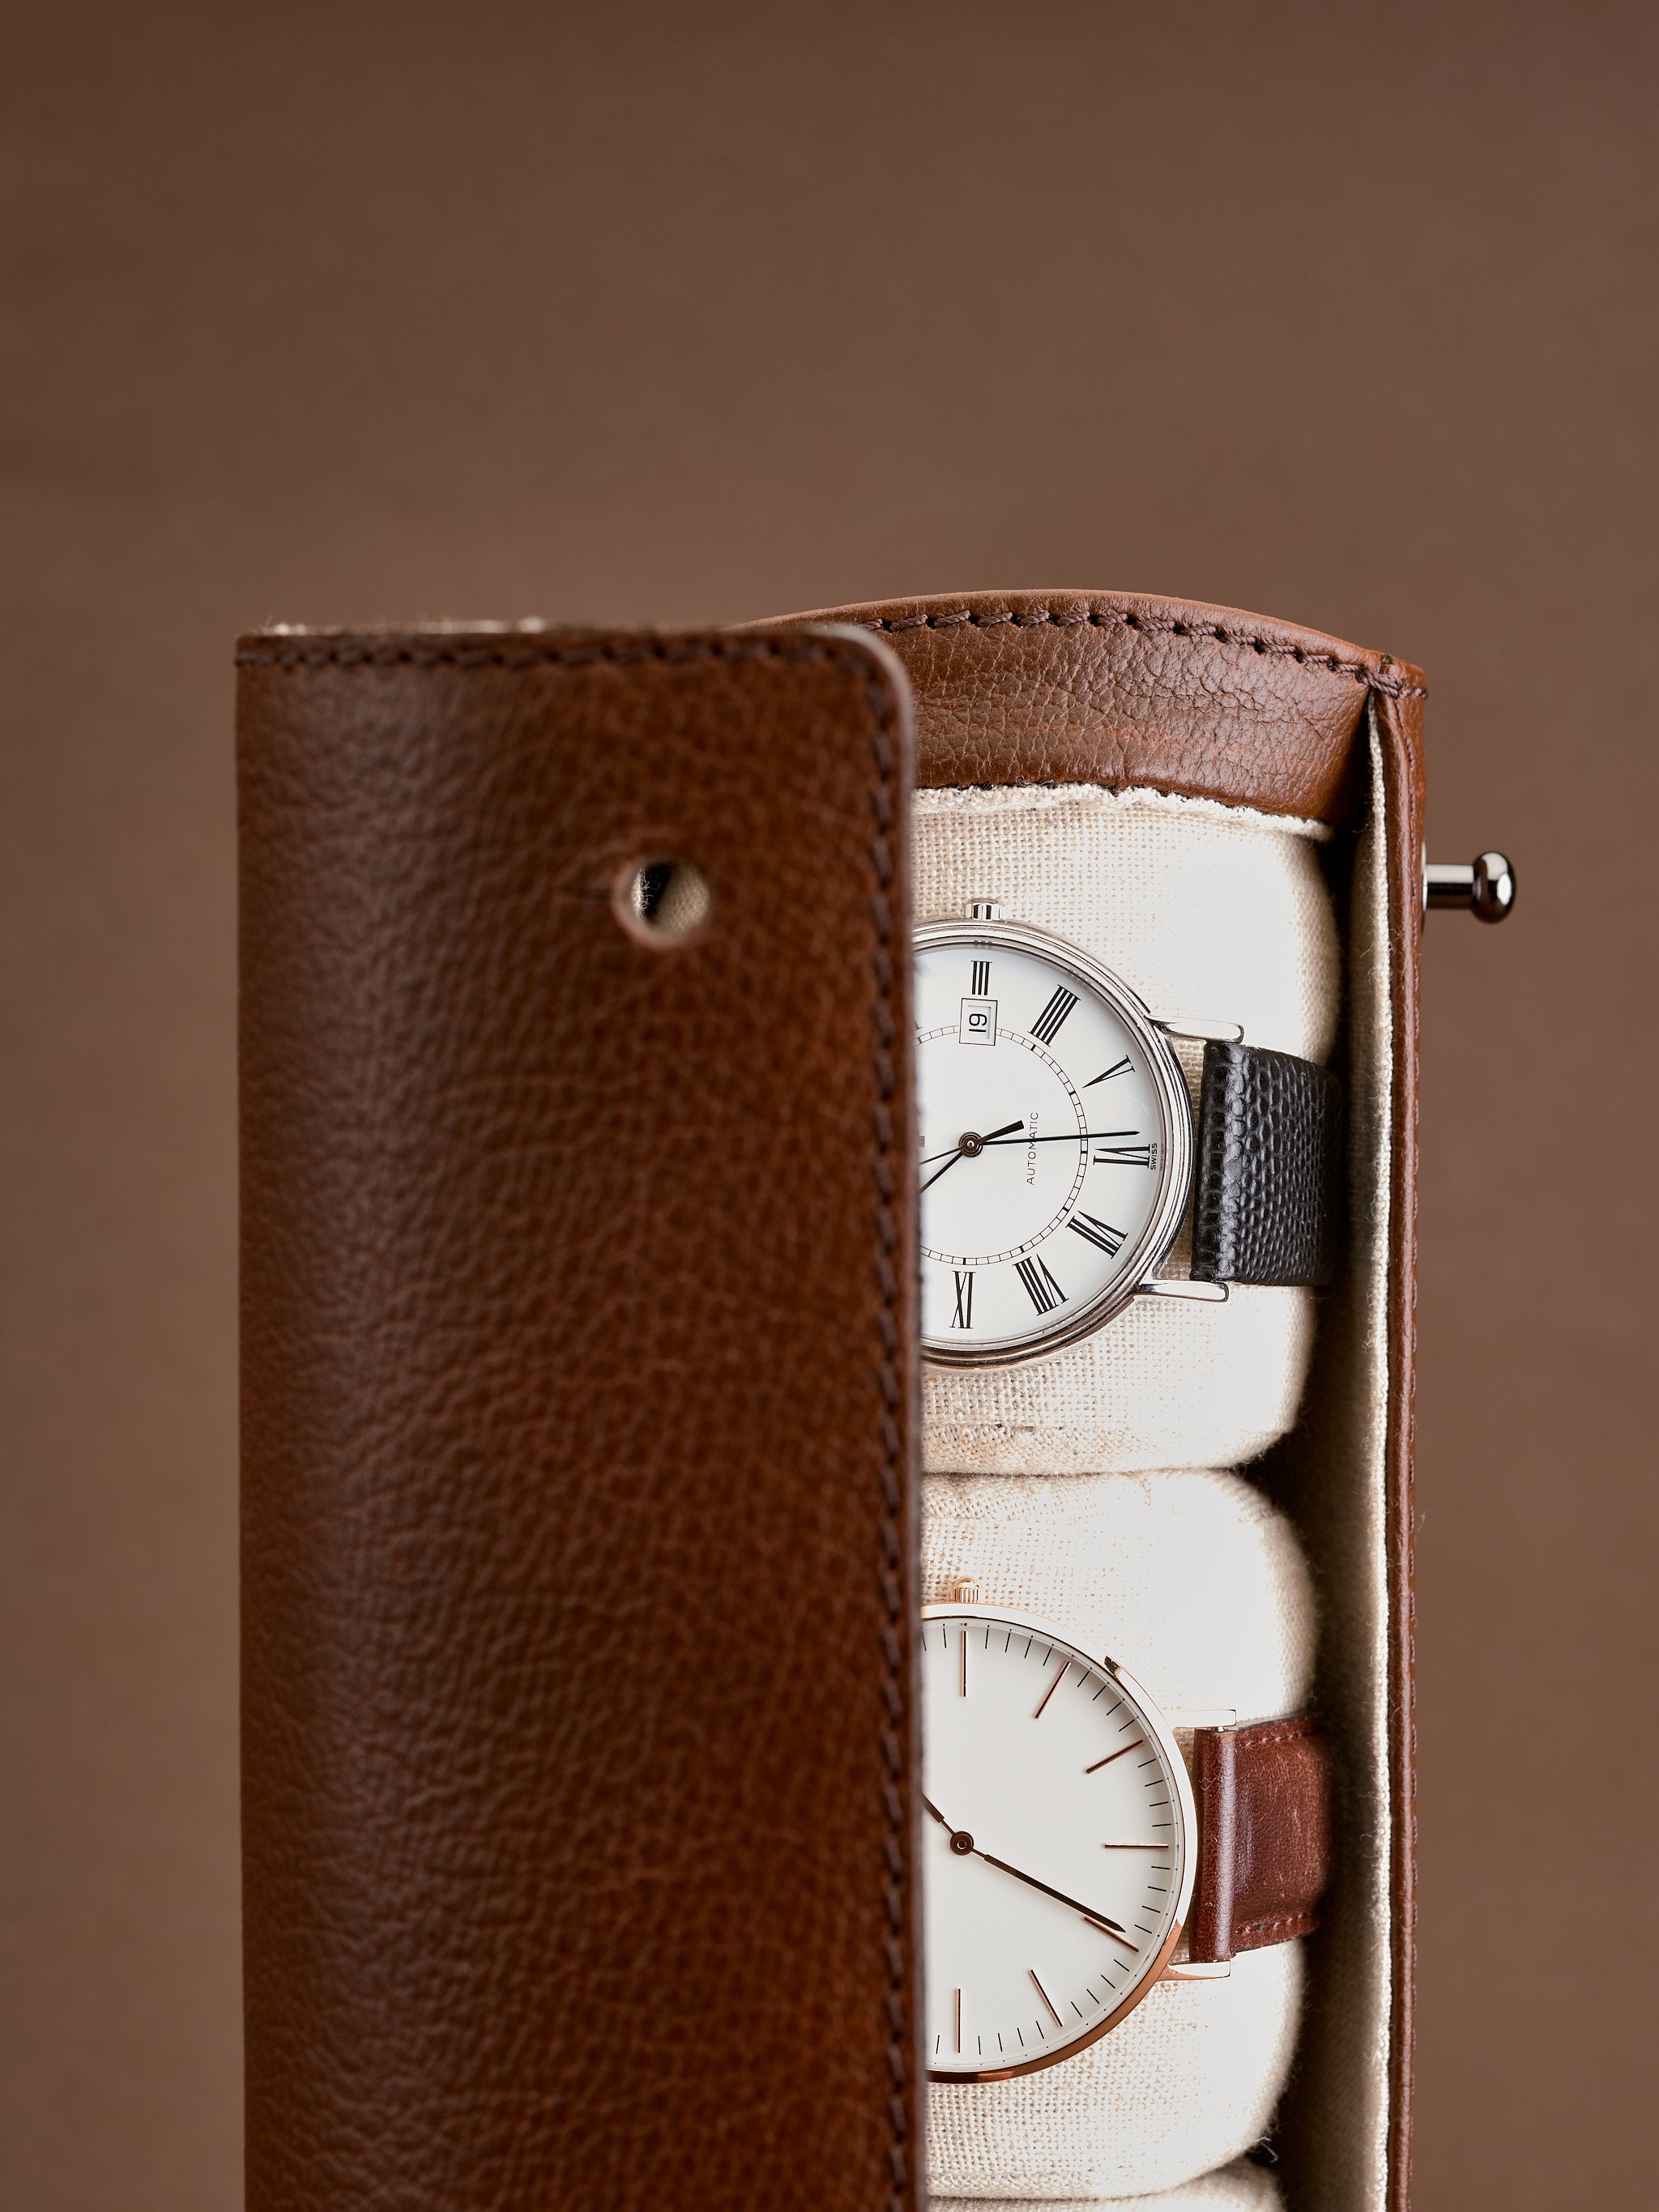 Personalized Leather Watch Roll Case Travel Watch Roll With 3 